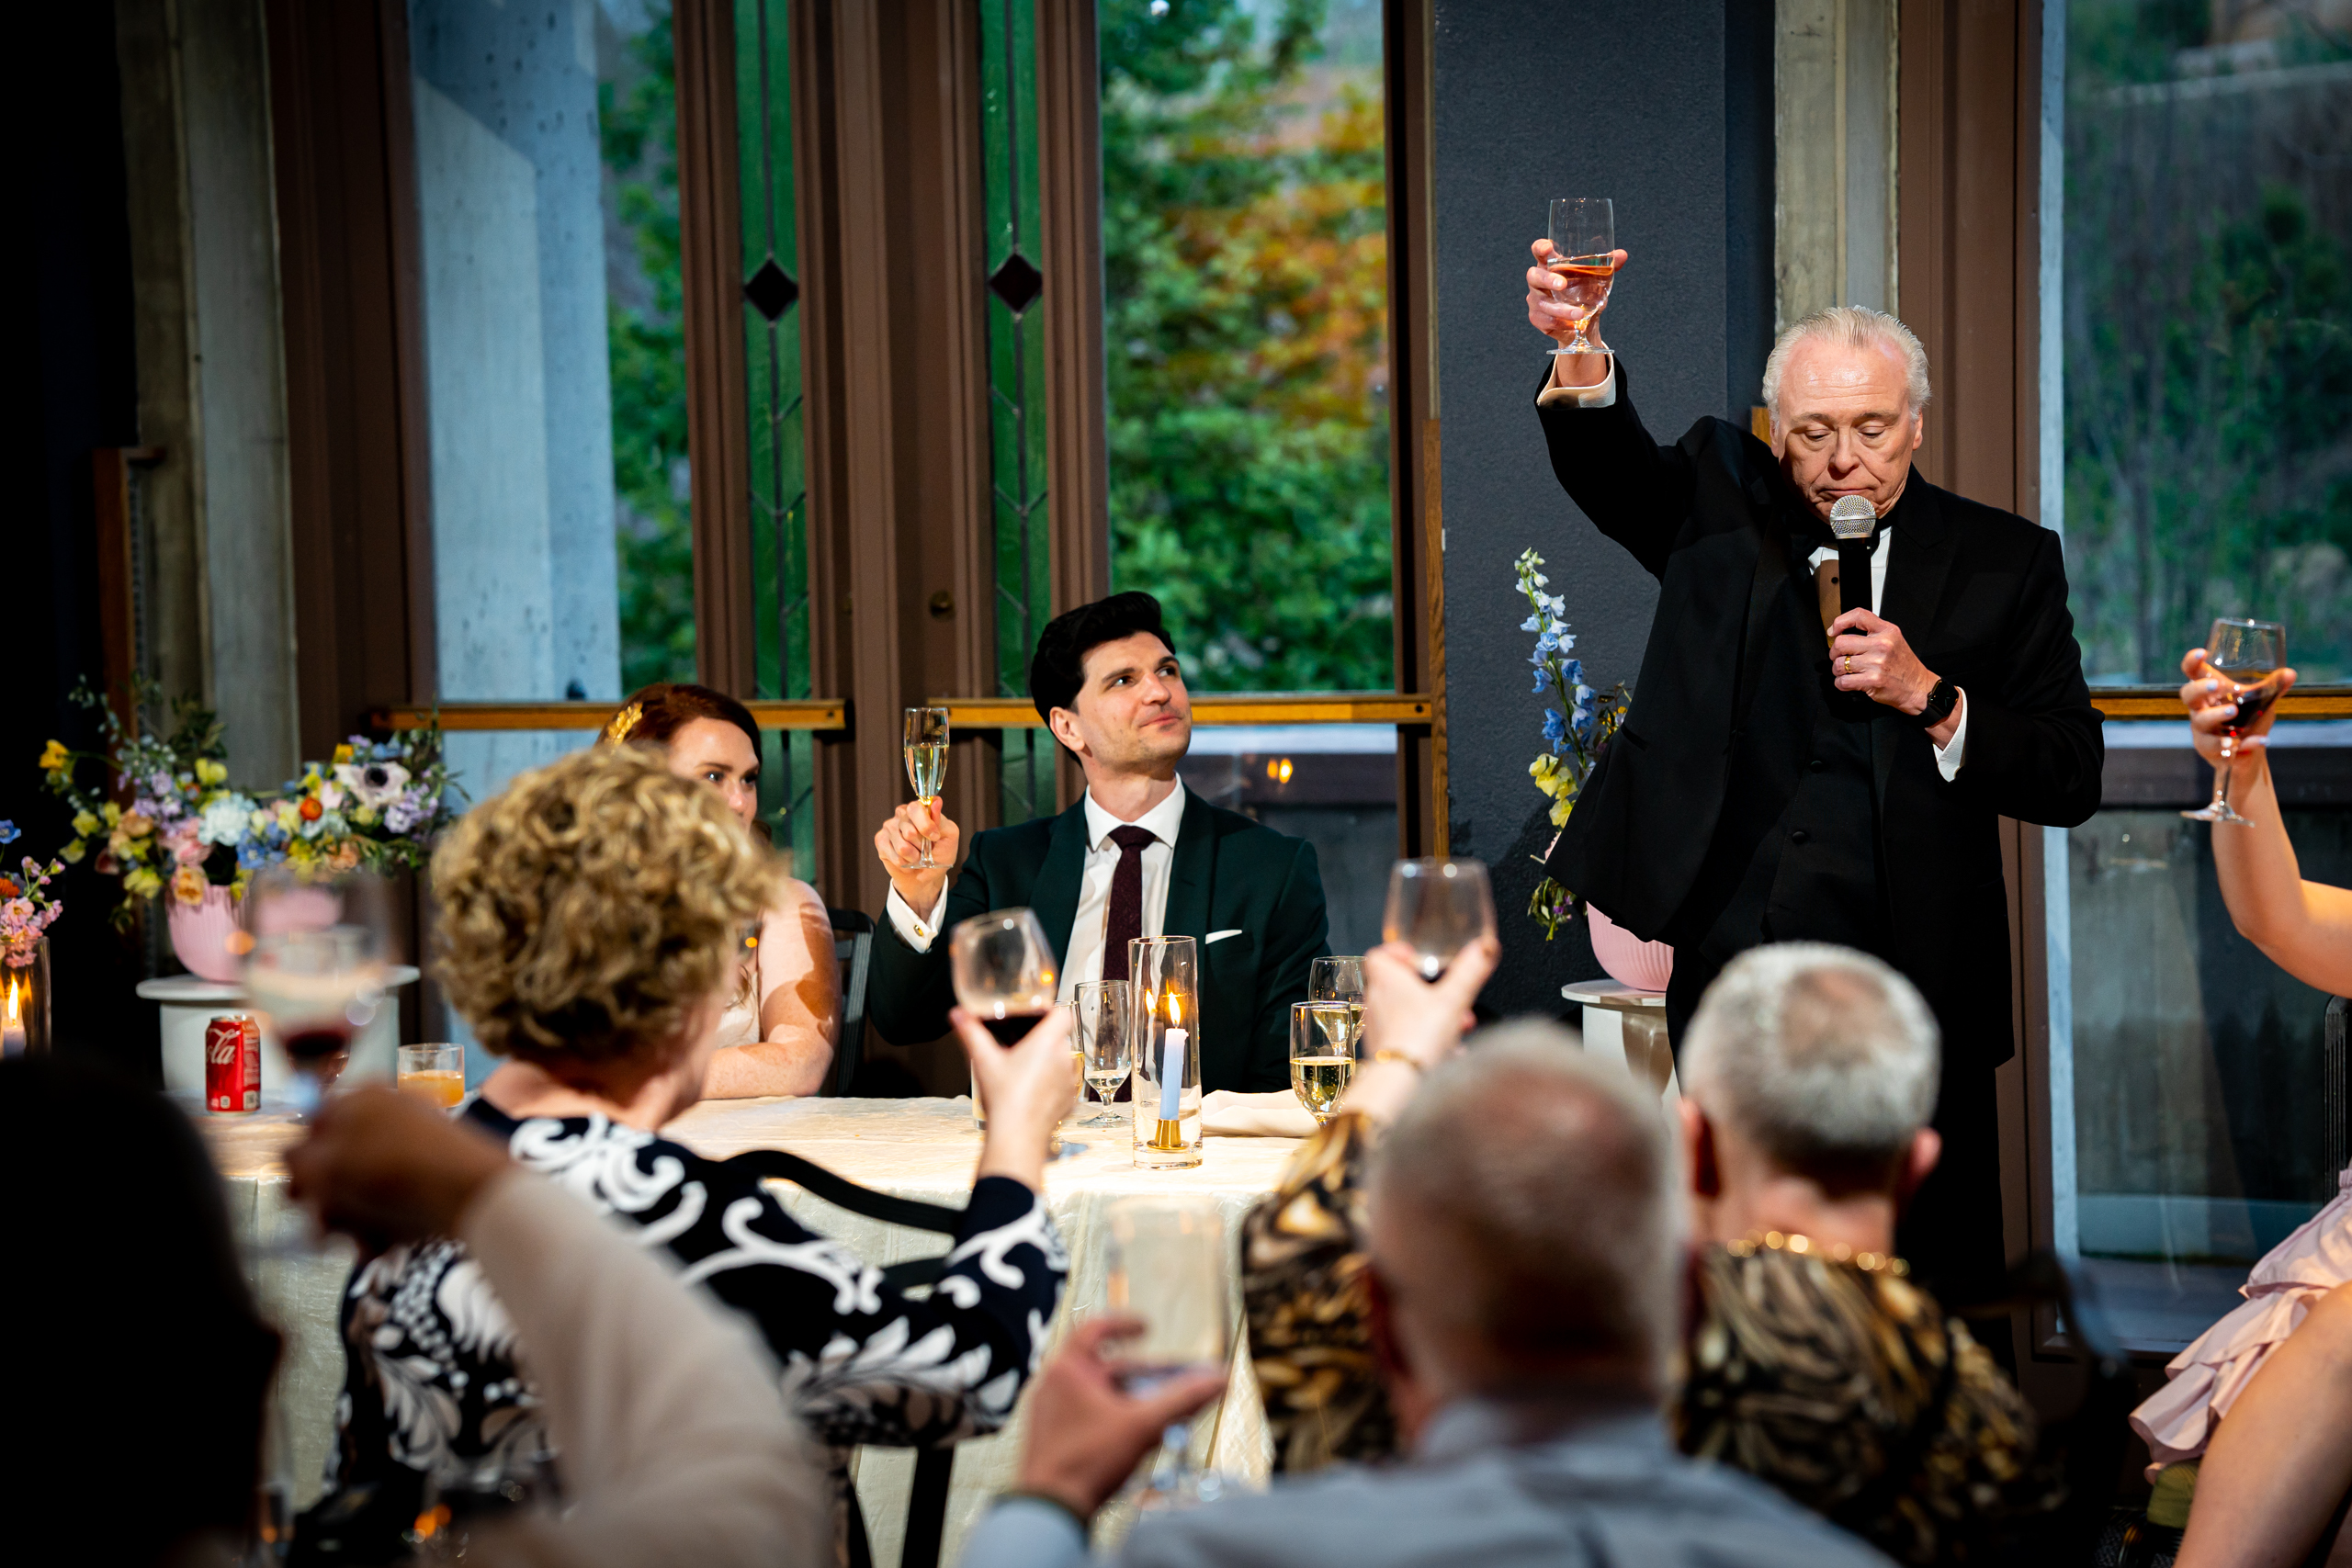 Father of the bride toasts to the bride and groom in his speech during the wedding reception, wedding photos, wedding photography, wedding photographer, wedding photo inspiration, Denver Botanic Garden wedding, Denver Botanic Garden wedding photos, Denver Botanic Garden wedding photography, Denver Botanic Garden wedding inspiration, Denver wedding venue, Denver wedding photos, Denver wedding photography, Denver wedding photographer, Colorado wedding photography